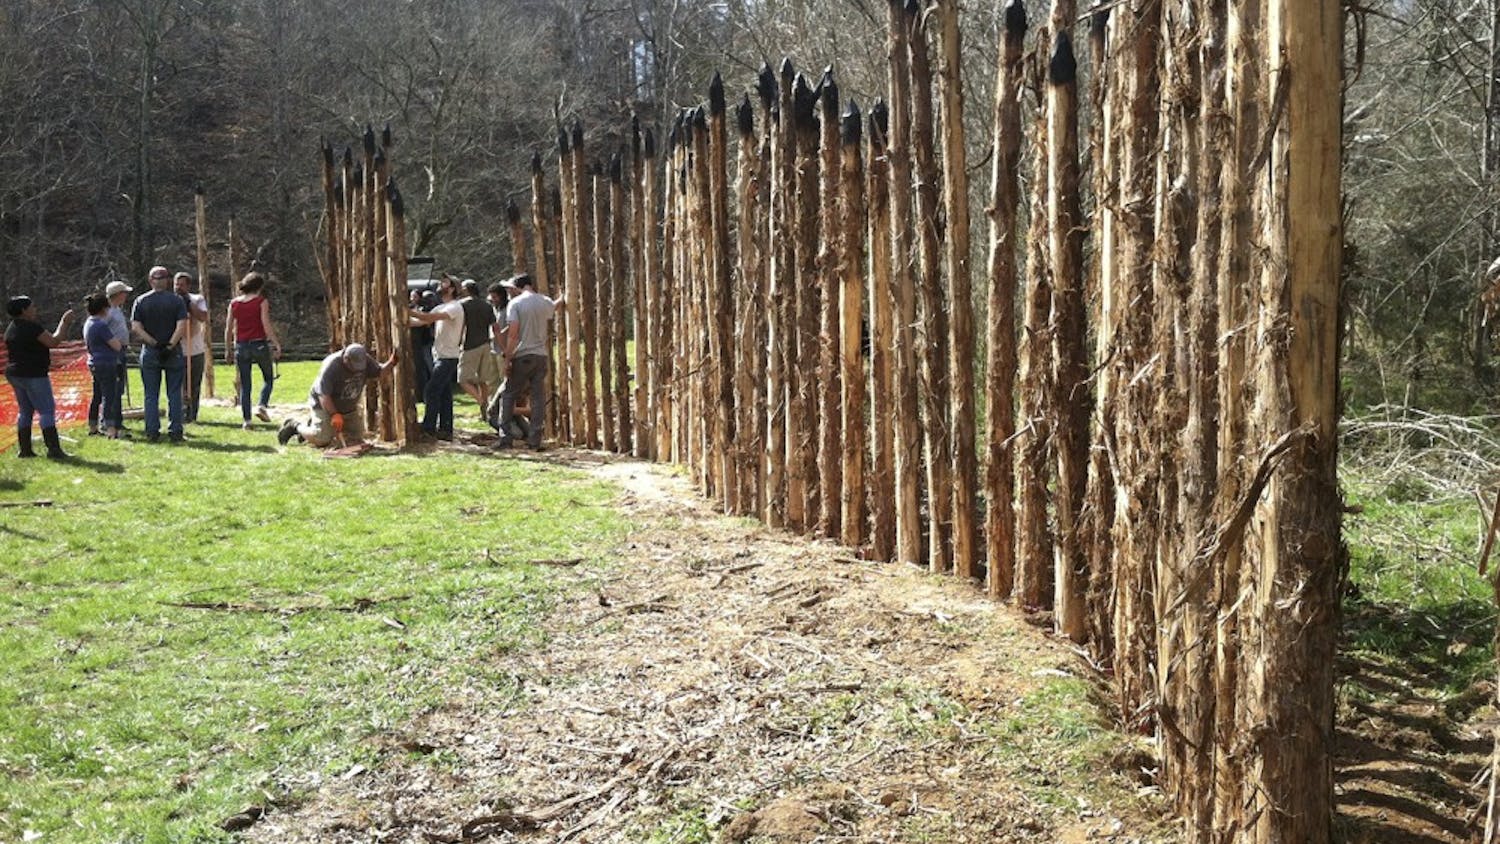 Volunteers help raise 100 cedar poles this past Saturday at the new Occaneechi Band of the Saponi Nation Replica Village in Hillsborough. 400 cedar poles will eventually surround the site by this summer. Photo Courtesy of Holly Reid.